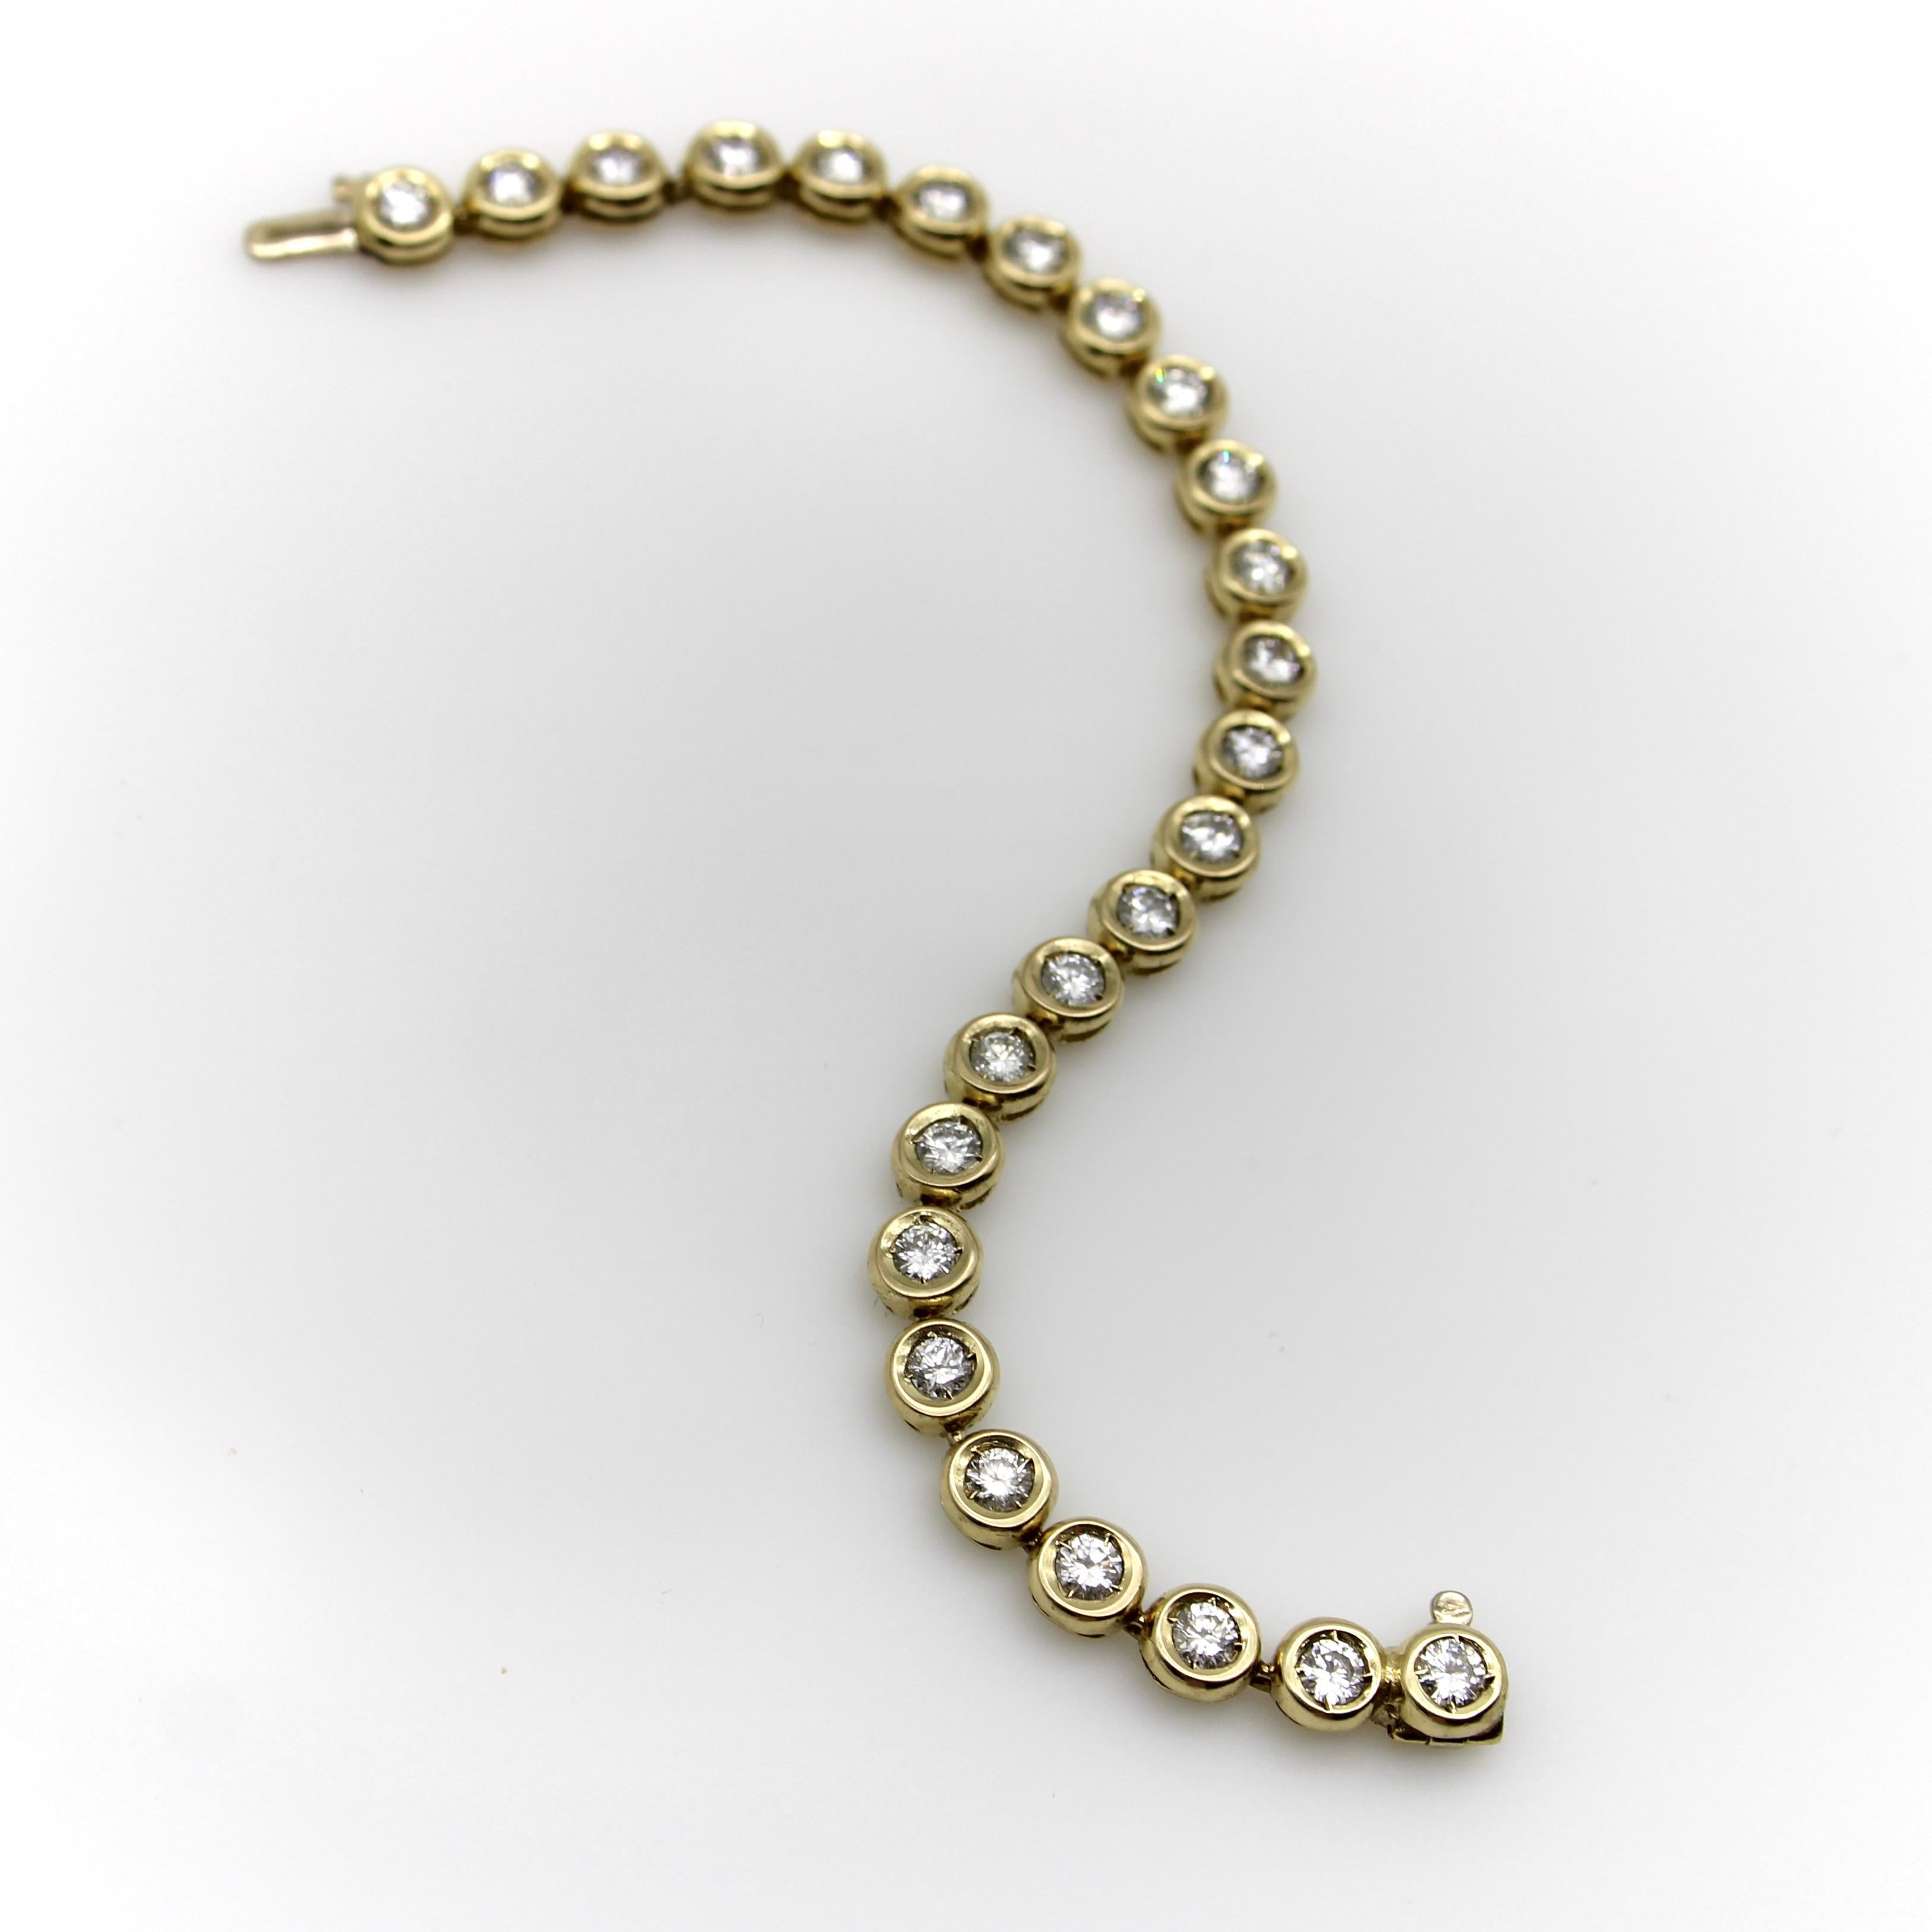 This 14k gold vintage bracelet consists of circular links, each with a natural diamond in its center. The bracelet sparkles with 25 diamonds for an impressive carat weight of 3.5. The circular links are inset to create a mount, and the gold is